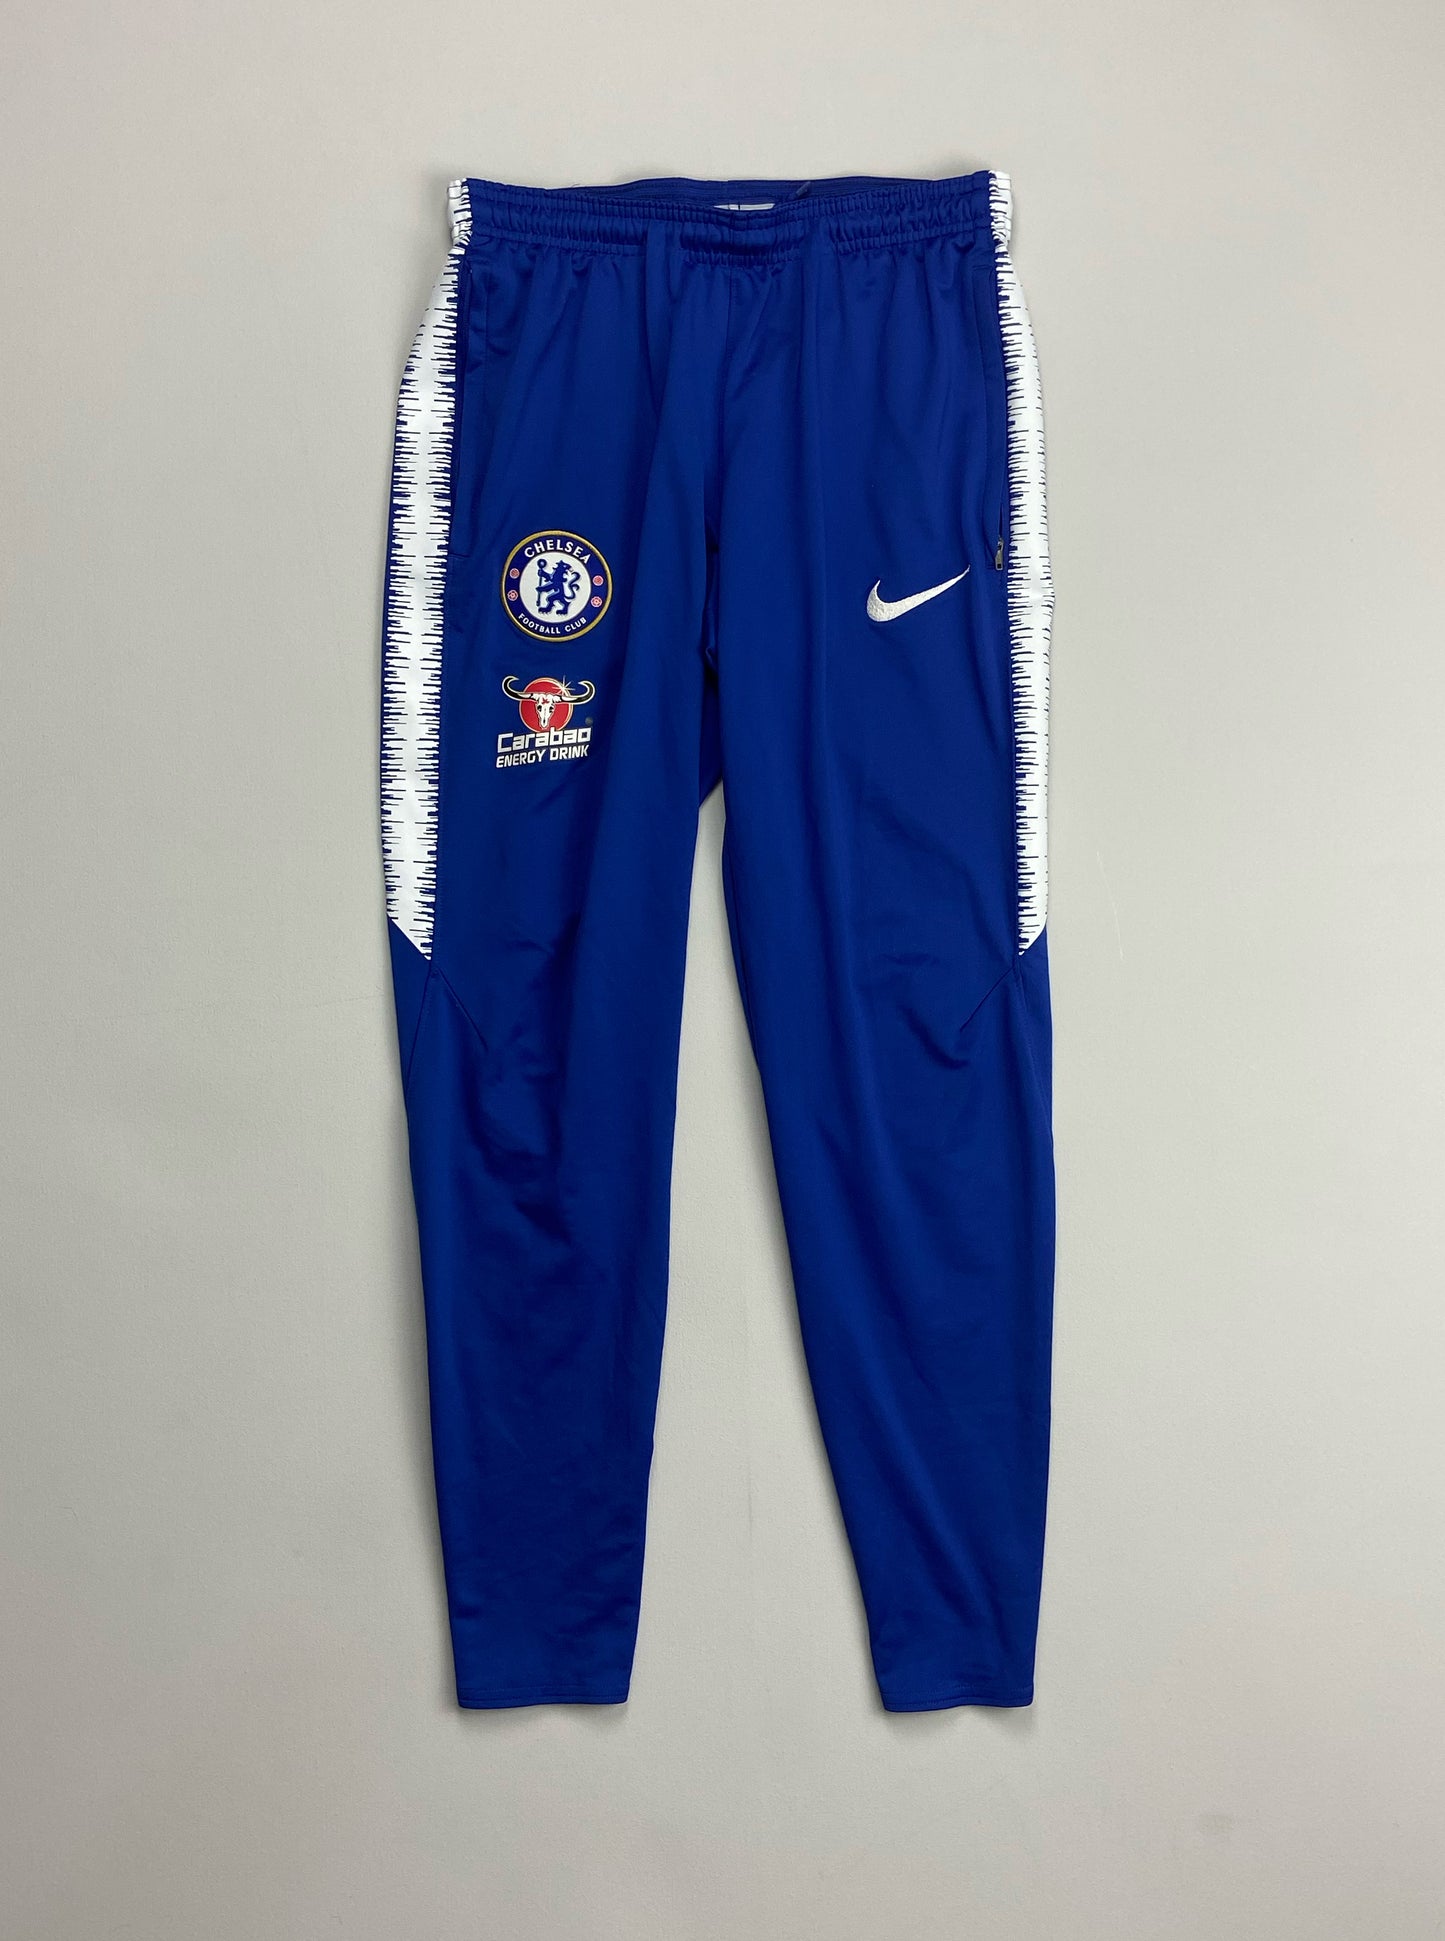 2019/20 CHELSEA TRACKSUIT BOTTOMS (S) NIKE